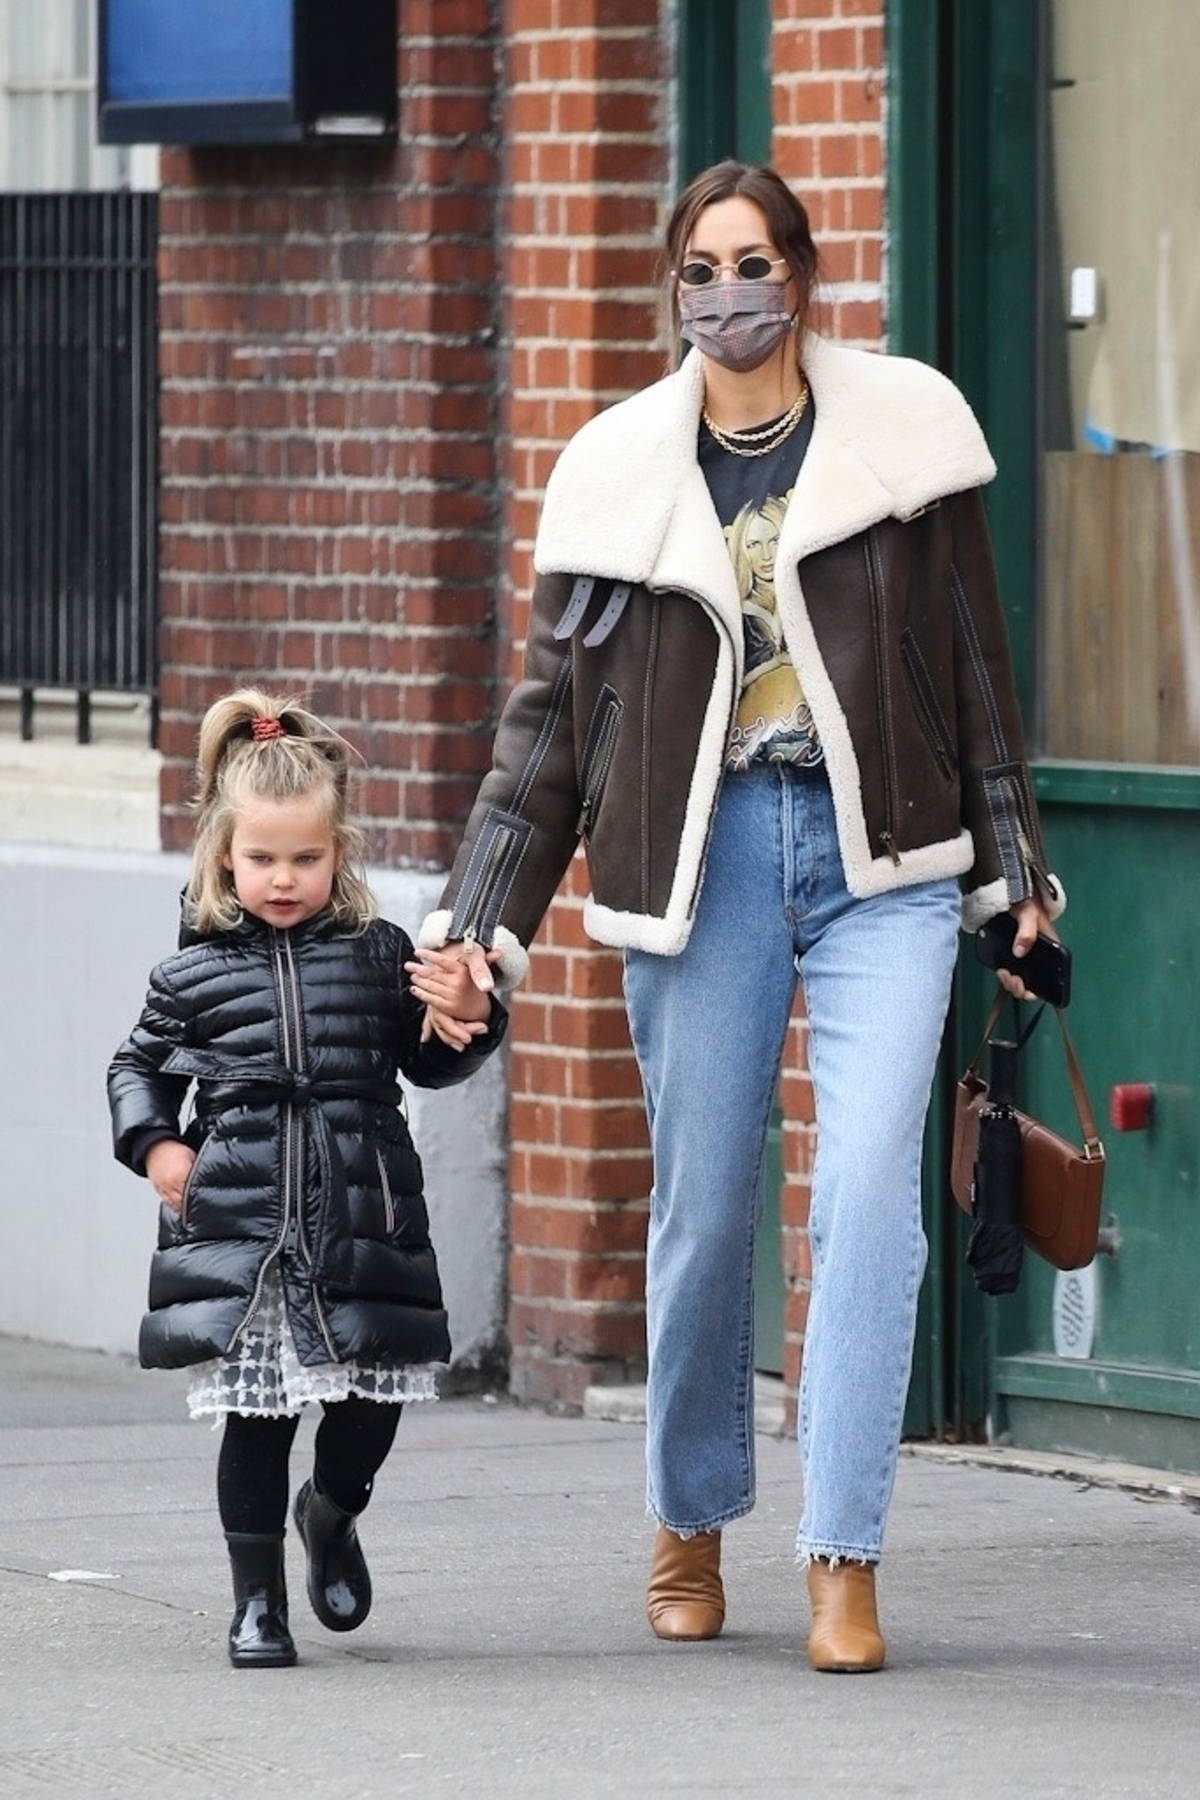 Irina Shayk Keeps It Stylish As She Steps Out On A Stroll With Her Daughter Lea In New York City